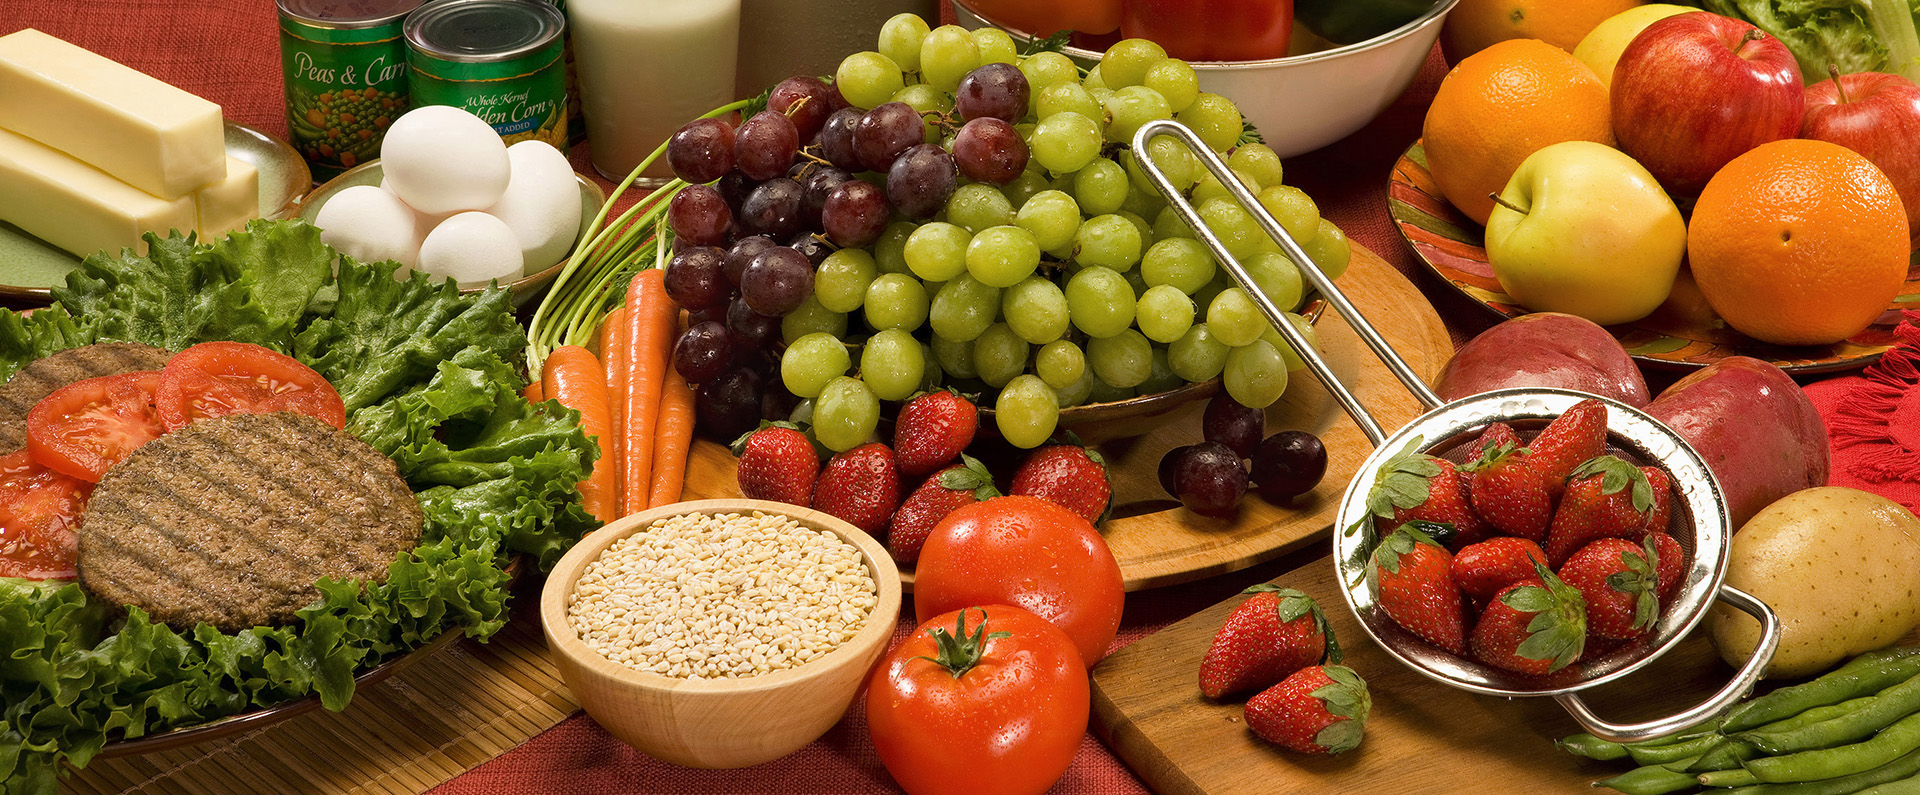 An arrangement of healthy foods including strawberries, grapes, tomatoes, apples, eggs, butter, and oranges. 